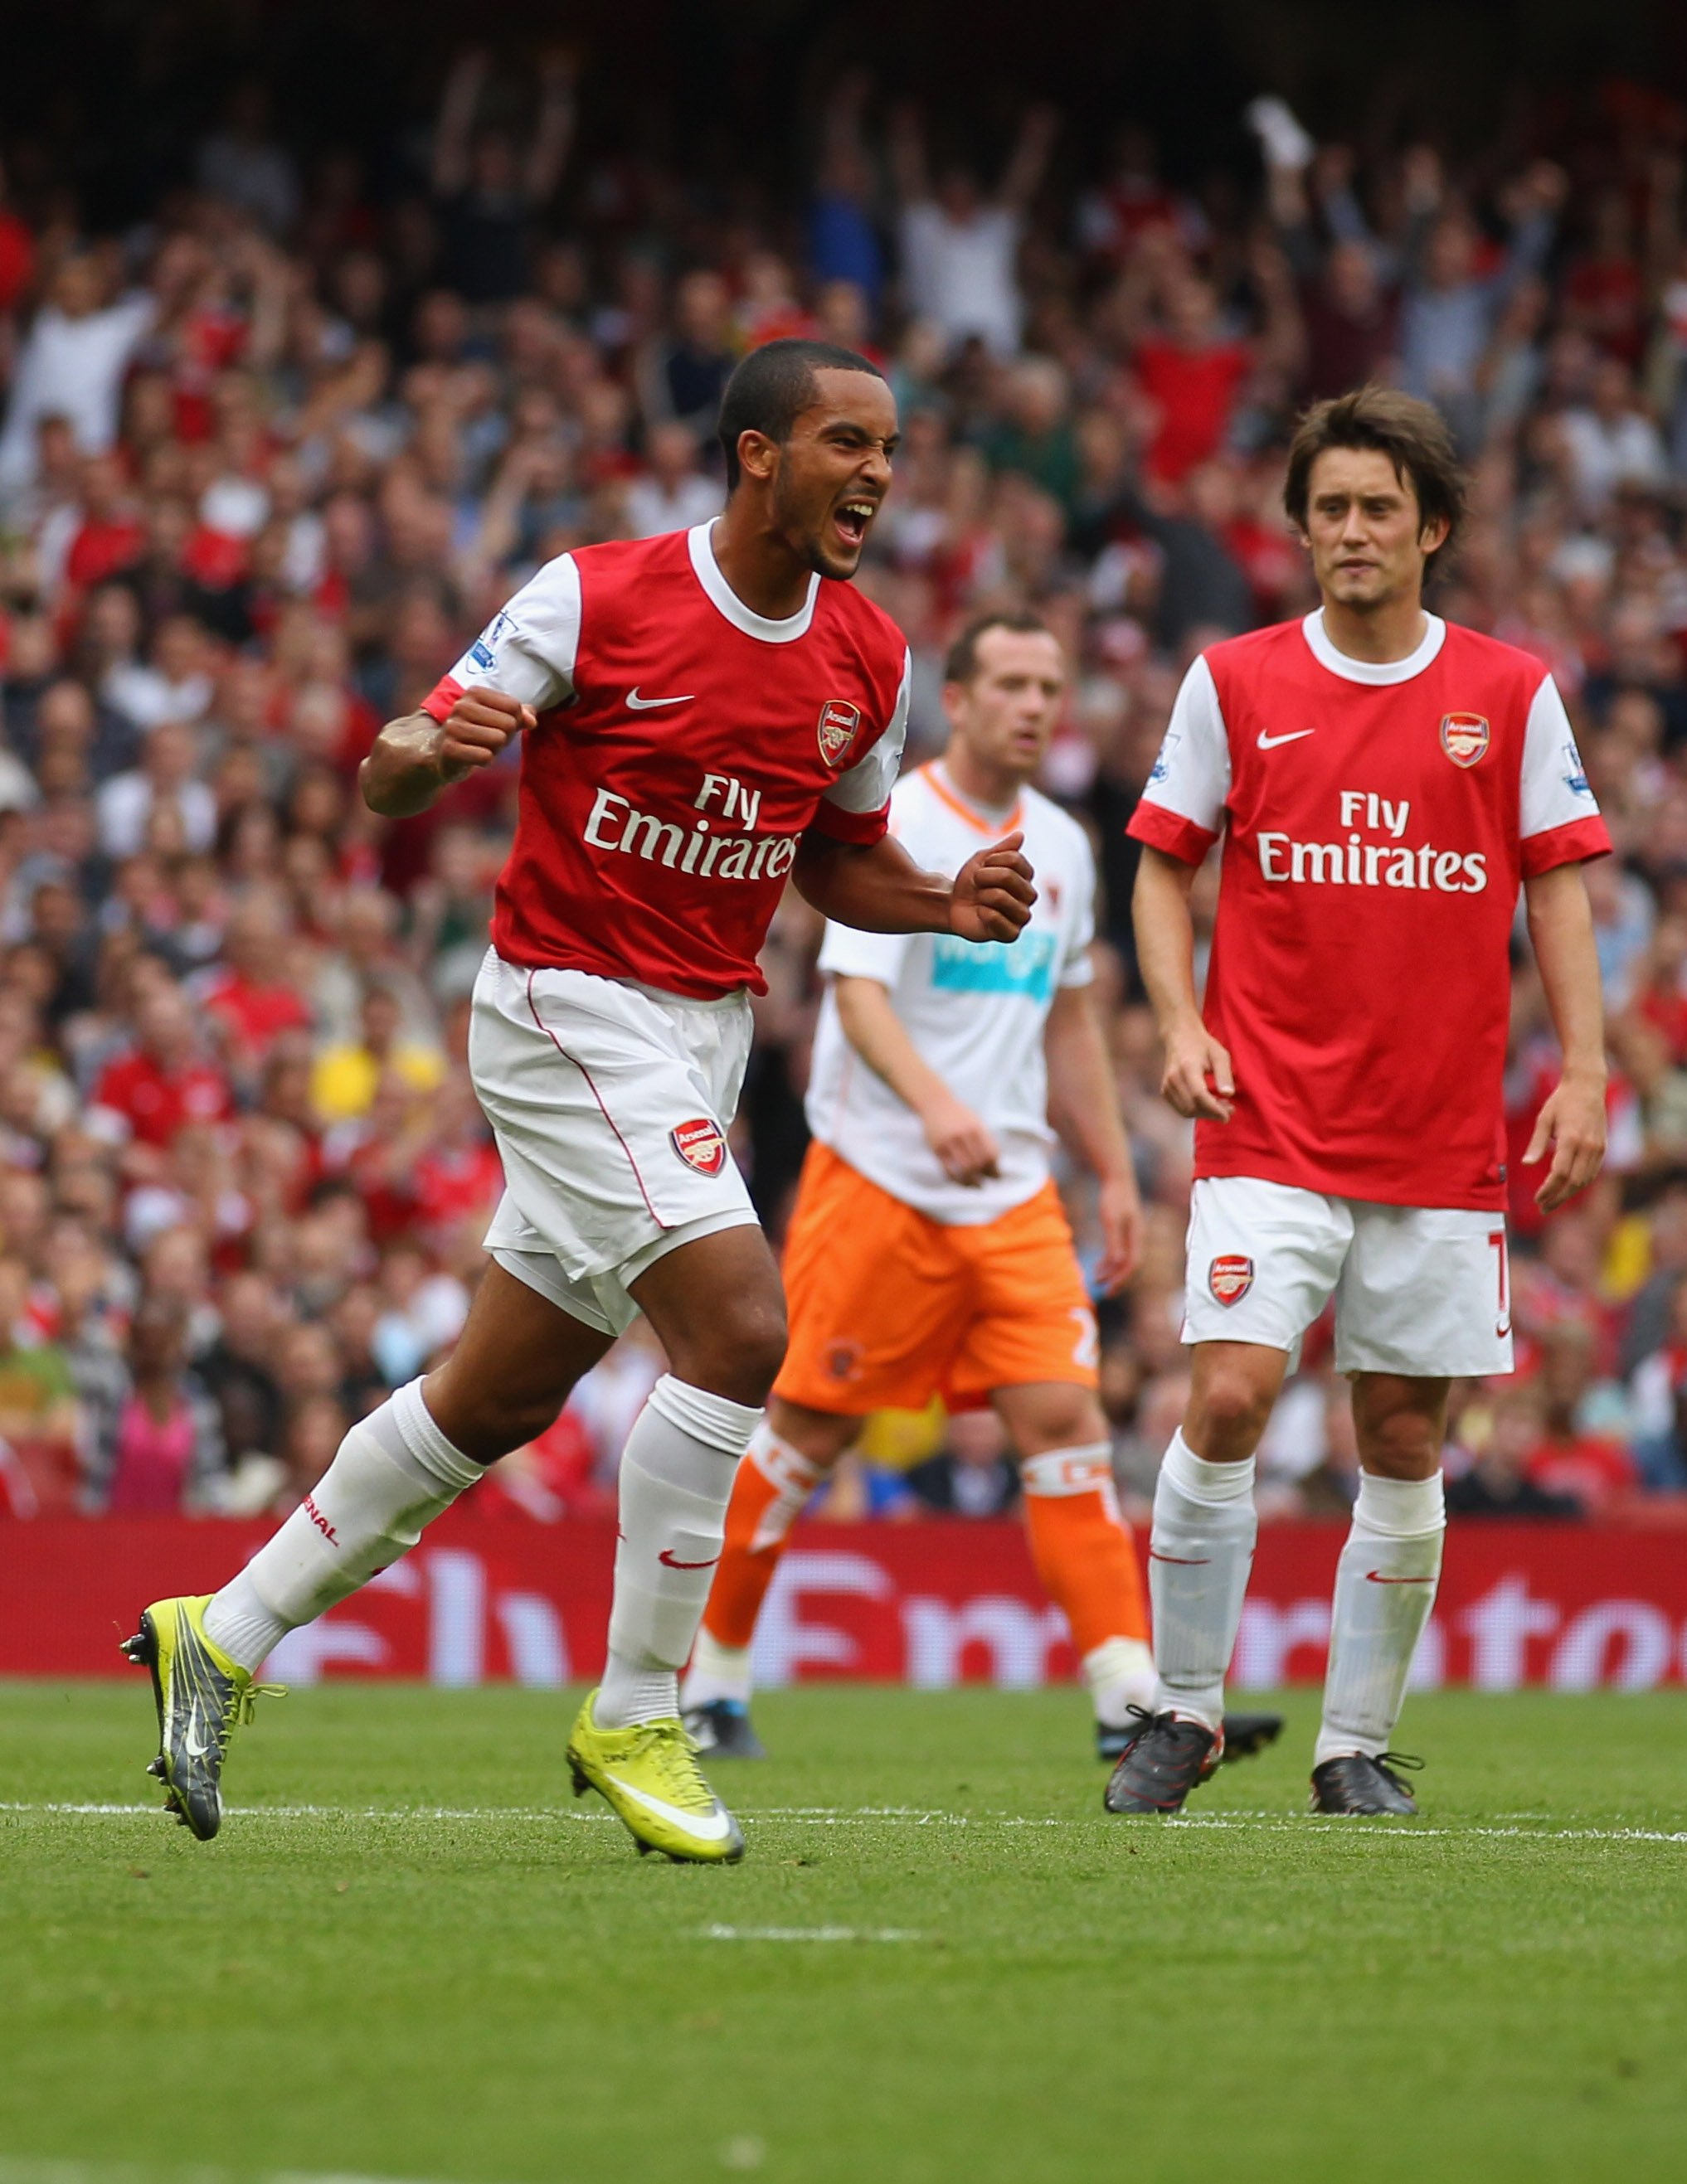 LONDON, ENGLAND - AUGUST 21:  Theo Walcott of Arsenal celebrates his third goal during the Barclays Premier League match between Arsenal and Blackpool at The Emirates Stadium on August 21, 2010 in London, England.  (Photo by Clive Rose/Getty Images)